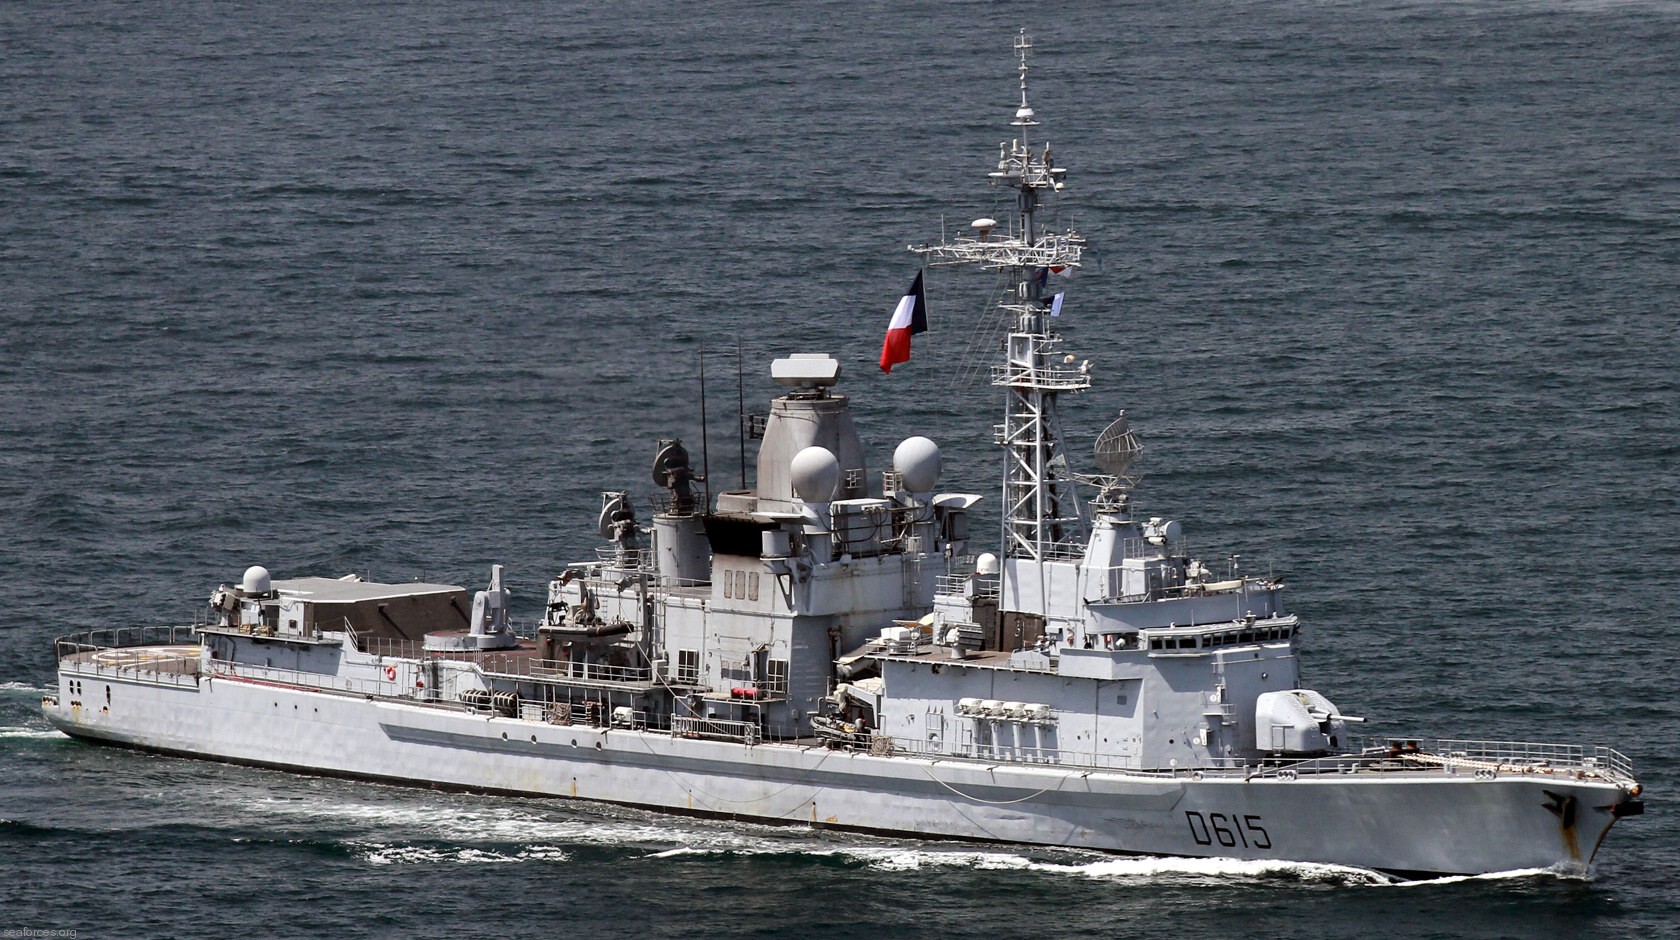 d-615 fs jean bart cassard f70aa class guided missile frigate ffgh ddg french navy marine nationale 09